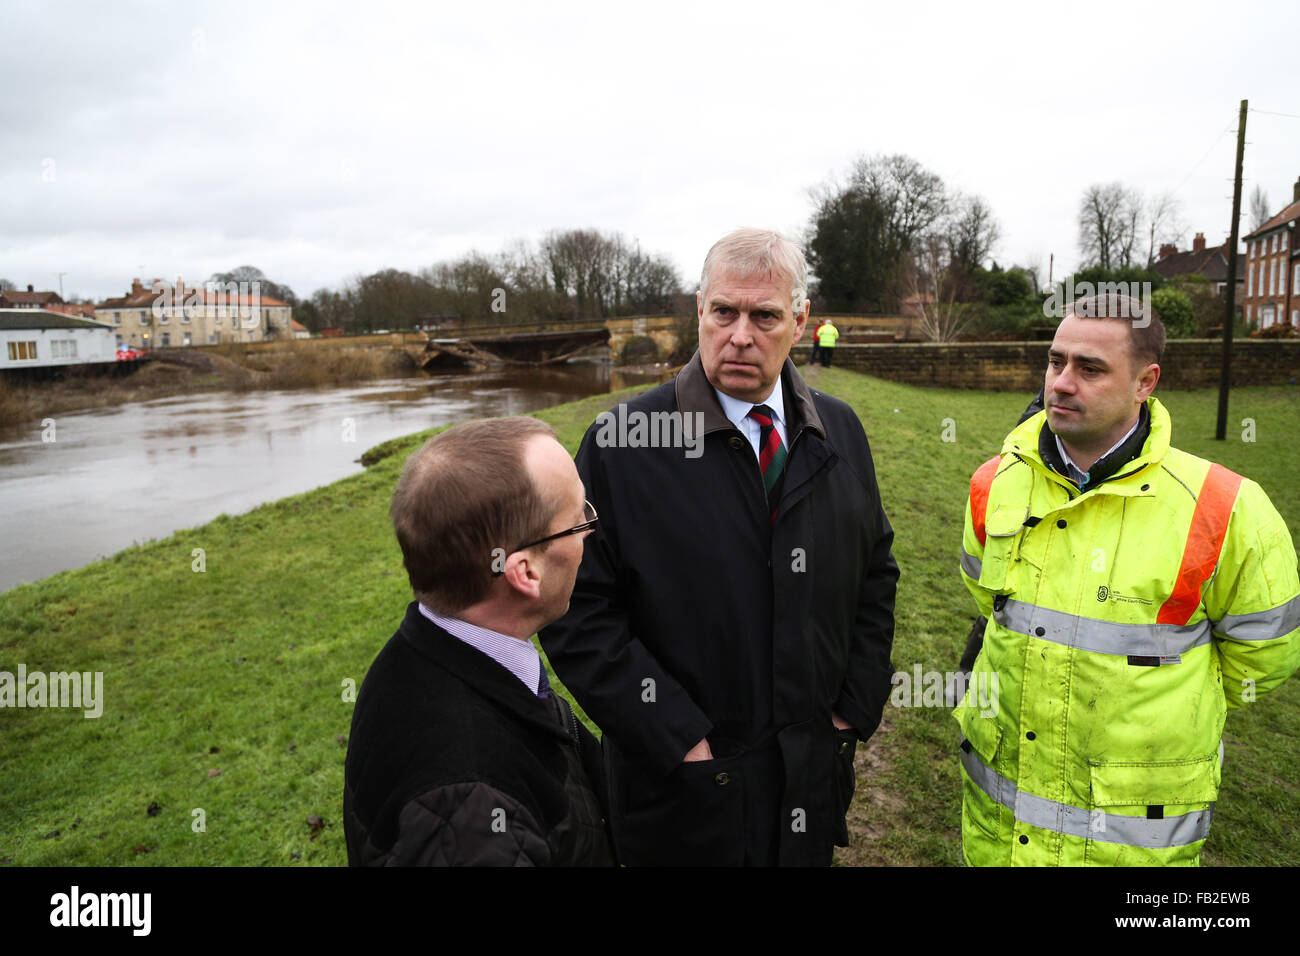 Prince Andrew, The Duke of York, (centre) talks to Councillor Richard Sweeting, Cjairman of Selby District Council, (left) and Andrew Wood, Senior Engineer At North Yorkshire County Council, (right), during a visit to the town of Tadcaster in North Yorkshire to see the damage caused by flooding in the last month. The town was heavily affected after the River Wharfe burst it's banks causing the bridge to partially collapse. Credit:  Ian Hinchliffe/Alamy Live News Stock Photo